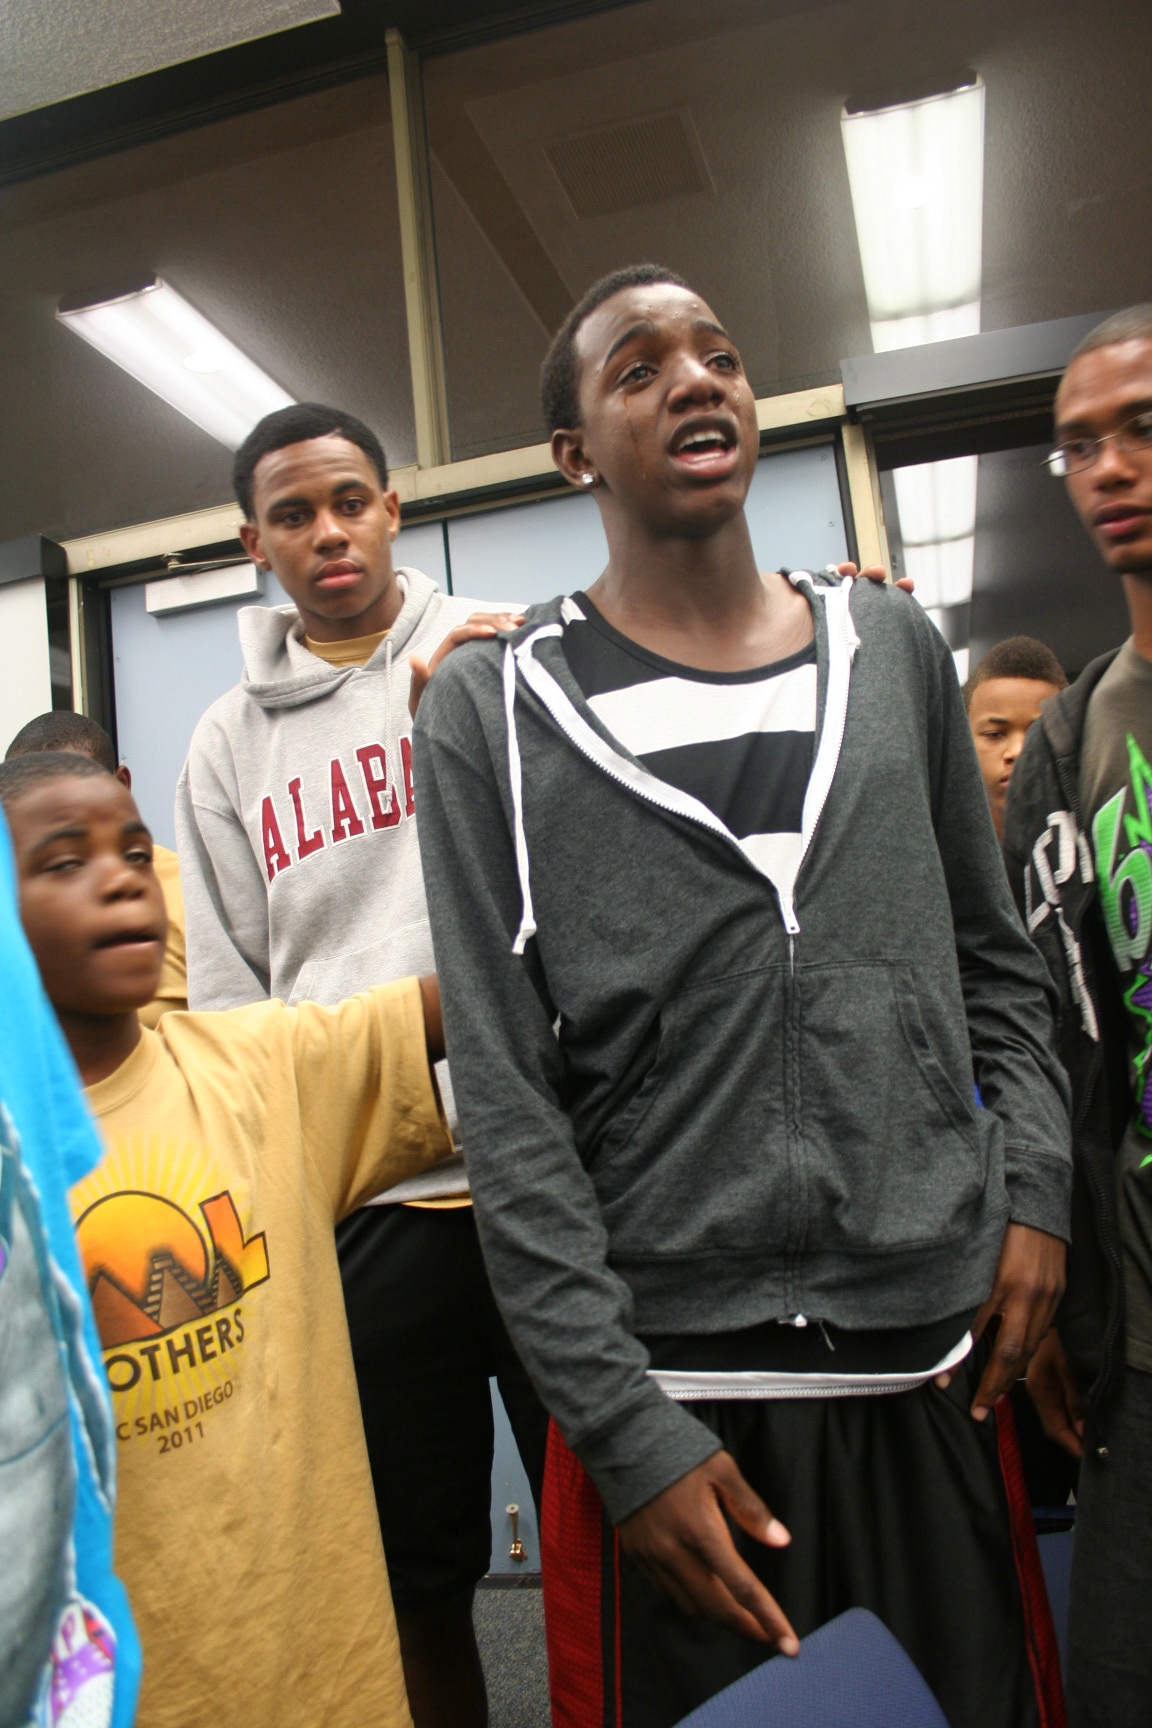 Young men confronting their fears